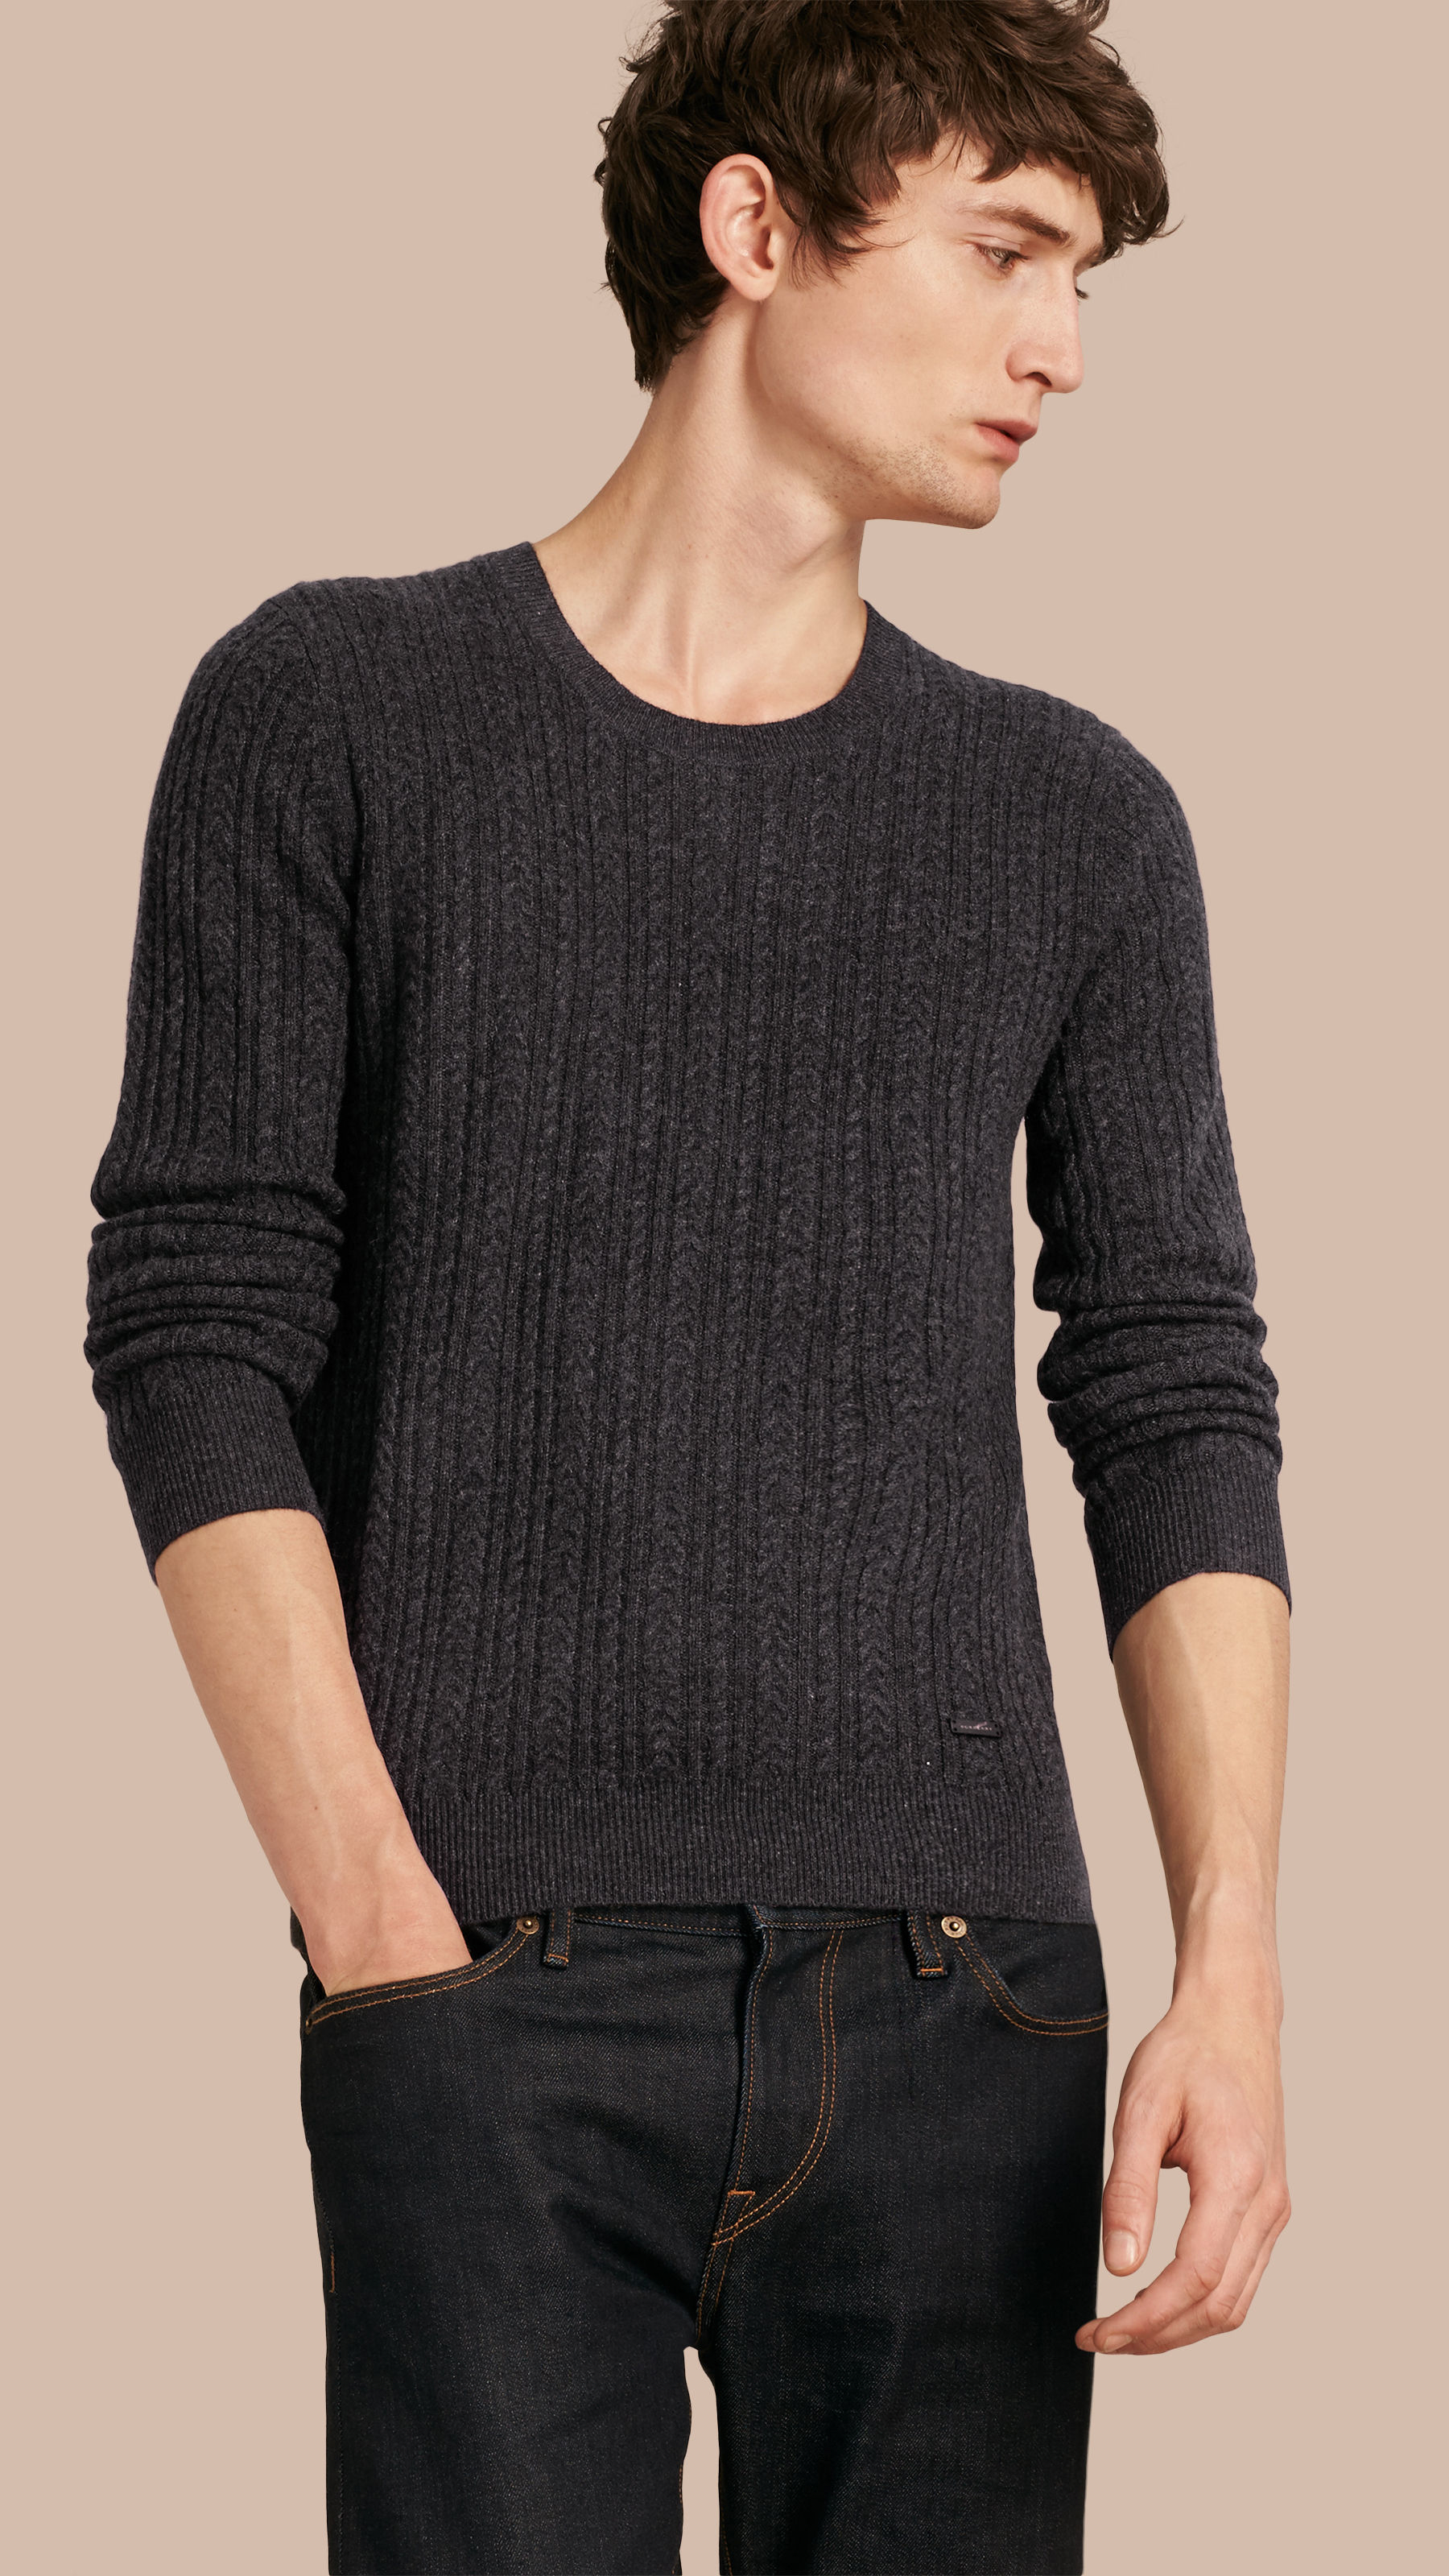 Lyst - Burberry Aran Knit Cashmere Sweater Charcoal in Gray for Men